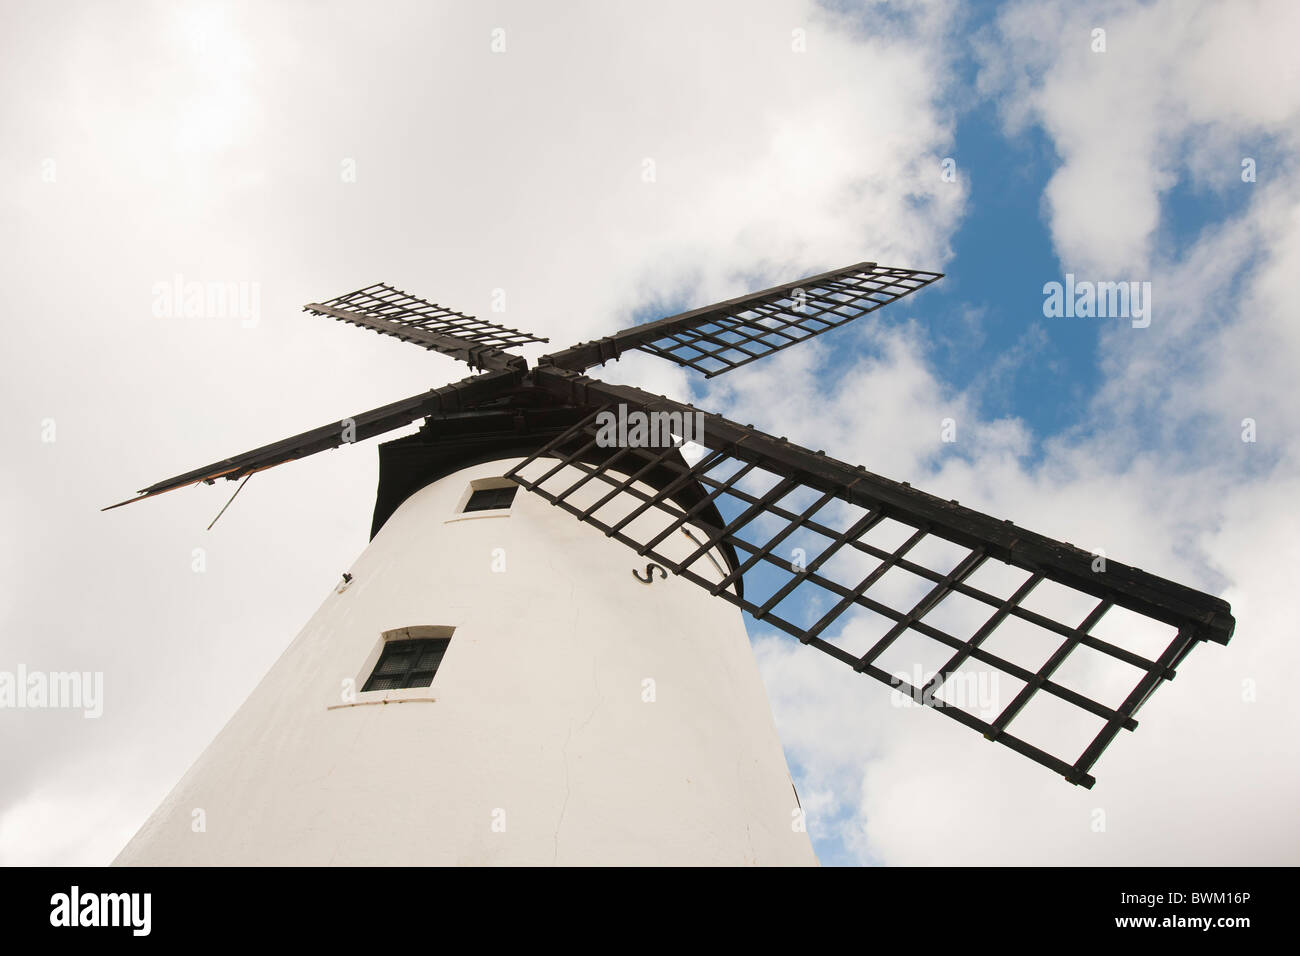 A sail snapped off the Lytham windmill by a severe storm with 100 mph winds, November 2010. Stock Photo